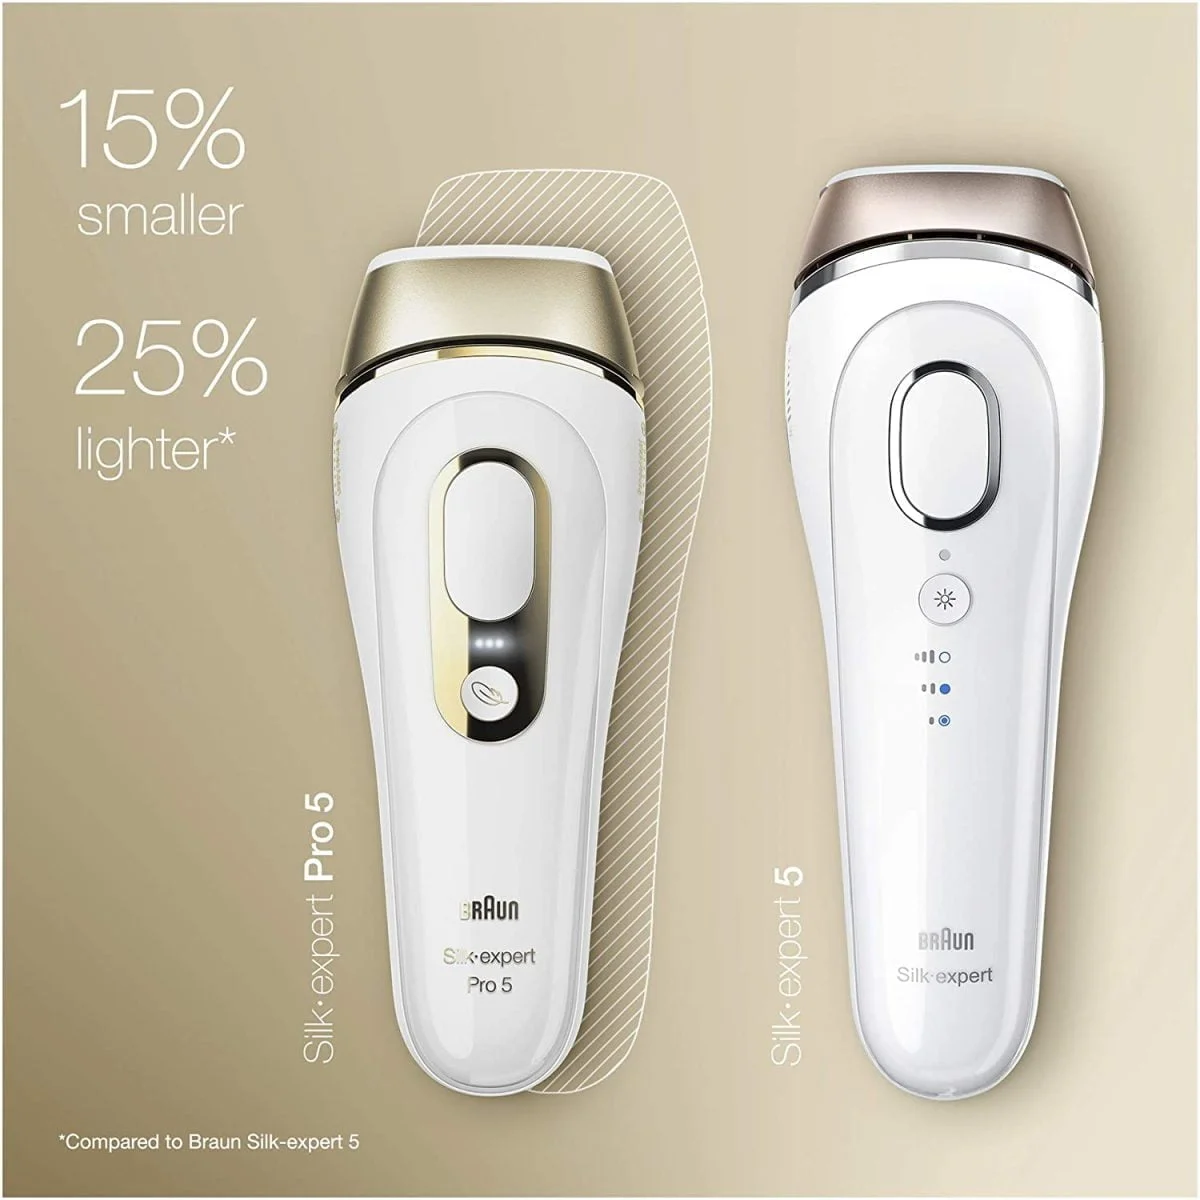 71Ks2Qgakdl. Ac Sl1500 Braun &Lt;H1&Gt;Braun Silk Expert Pro 5 Pl5117 Latest Generation Ipl, Permanent Hair Removal&Lt;/H1&Gt; Https://Www.youtube.com/Watch?V=N-T6D6Jn588 &Lt;Ul Class=&Quot;A-Unordered-List A-Vertical A-Spacing-Mini&Quot;&Gt; &Lt;Li&Gt;&Lt;Span Class=&Quot;A-List-Item&Quot;&Gt;Braun’s Latest Generation Ipl. The Safest, Fastest And Most Efficient Ipl*. Permanent Hair Reduction In Just 4 Weeks*. &Lt;/Span&Gt;&Lt;/Li&Gt; &Lt;Li&Gt;&Lt;Span Class=&Quot;A-List-Item&Quot;&Gt; The Safest Ipl Technology. Clinically Tested And Dermatologically Accredited As Skin Safe By An International Skin Health Organization (Skin Health Alliance) &Lt;/Span&Gt;&Lt;/Li&Gt; &Lt;Li&Gt;&Lt;Span Class=&Quot;A-List-Item&Quot;&Gt; Smart Ipl With Sensoadapttm Skin Sensor (With Uv Protection): The Only Ipl Technology That Automatically And Continuously Adapts To Your Skin Tone &Lt;/Span&Gt;&Lt;/Li&Gt; &Lt;Li&Gt;&Lt;Span Class=&Quot;A-List-Item&Quot;&Gt; The Fastest Ipl: Treat Both Legs In Less Than 5 Minutes At The Lowest Energy Level. 2 Times Faster Than The Previous Silk·expert 5. Includes Precision Head, Premium Pouch And Venus Razor &Lt;/Span&Gt;&Lt;/Li&Gt; &Lt;Li&Gt;&Lt;Span Class=&Quot;A-List-Item&Quot;&Gt; New Compact Design, 15% Smaller And 25% Lighter, For Easy Handling And Effortless Treatment. 4, Flashes, 3% More Than Previous Silk·expert 5 &Lt;/Span&Gt;&Lt;/Li&Gt; &Lt;Li&Gt;&Lt;Span Class=&Quot;A-List-Item&Quot;&Gt; Also Suitable For Men: The Silk-Expert Pro Is The Perfect Tool To Tackle Hair On The Chest, Back, Arms, Stomach And Legs&Lt;/Span&Gt;&Lt;/Li&Gt; &Lt;Li&Gt;400,000 Flashes In Total&Lt;/Li&Gt; &Lt;/Ul&Gt; Braun Silk Expert Pro 5 Braun Silk Expert Pro 5 - Pl5117